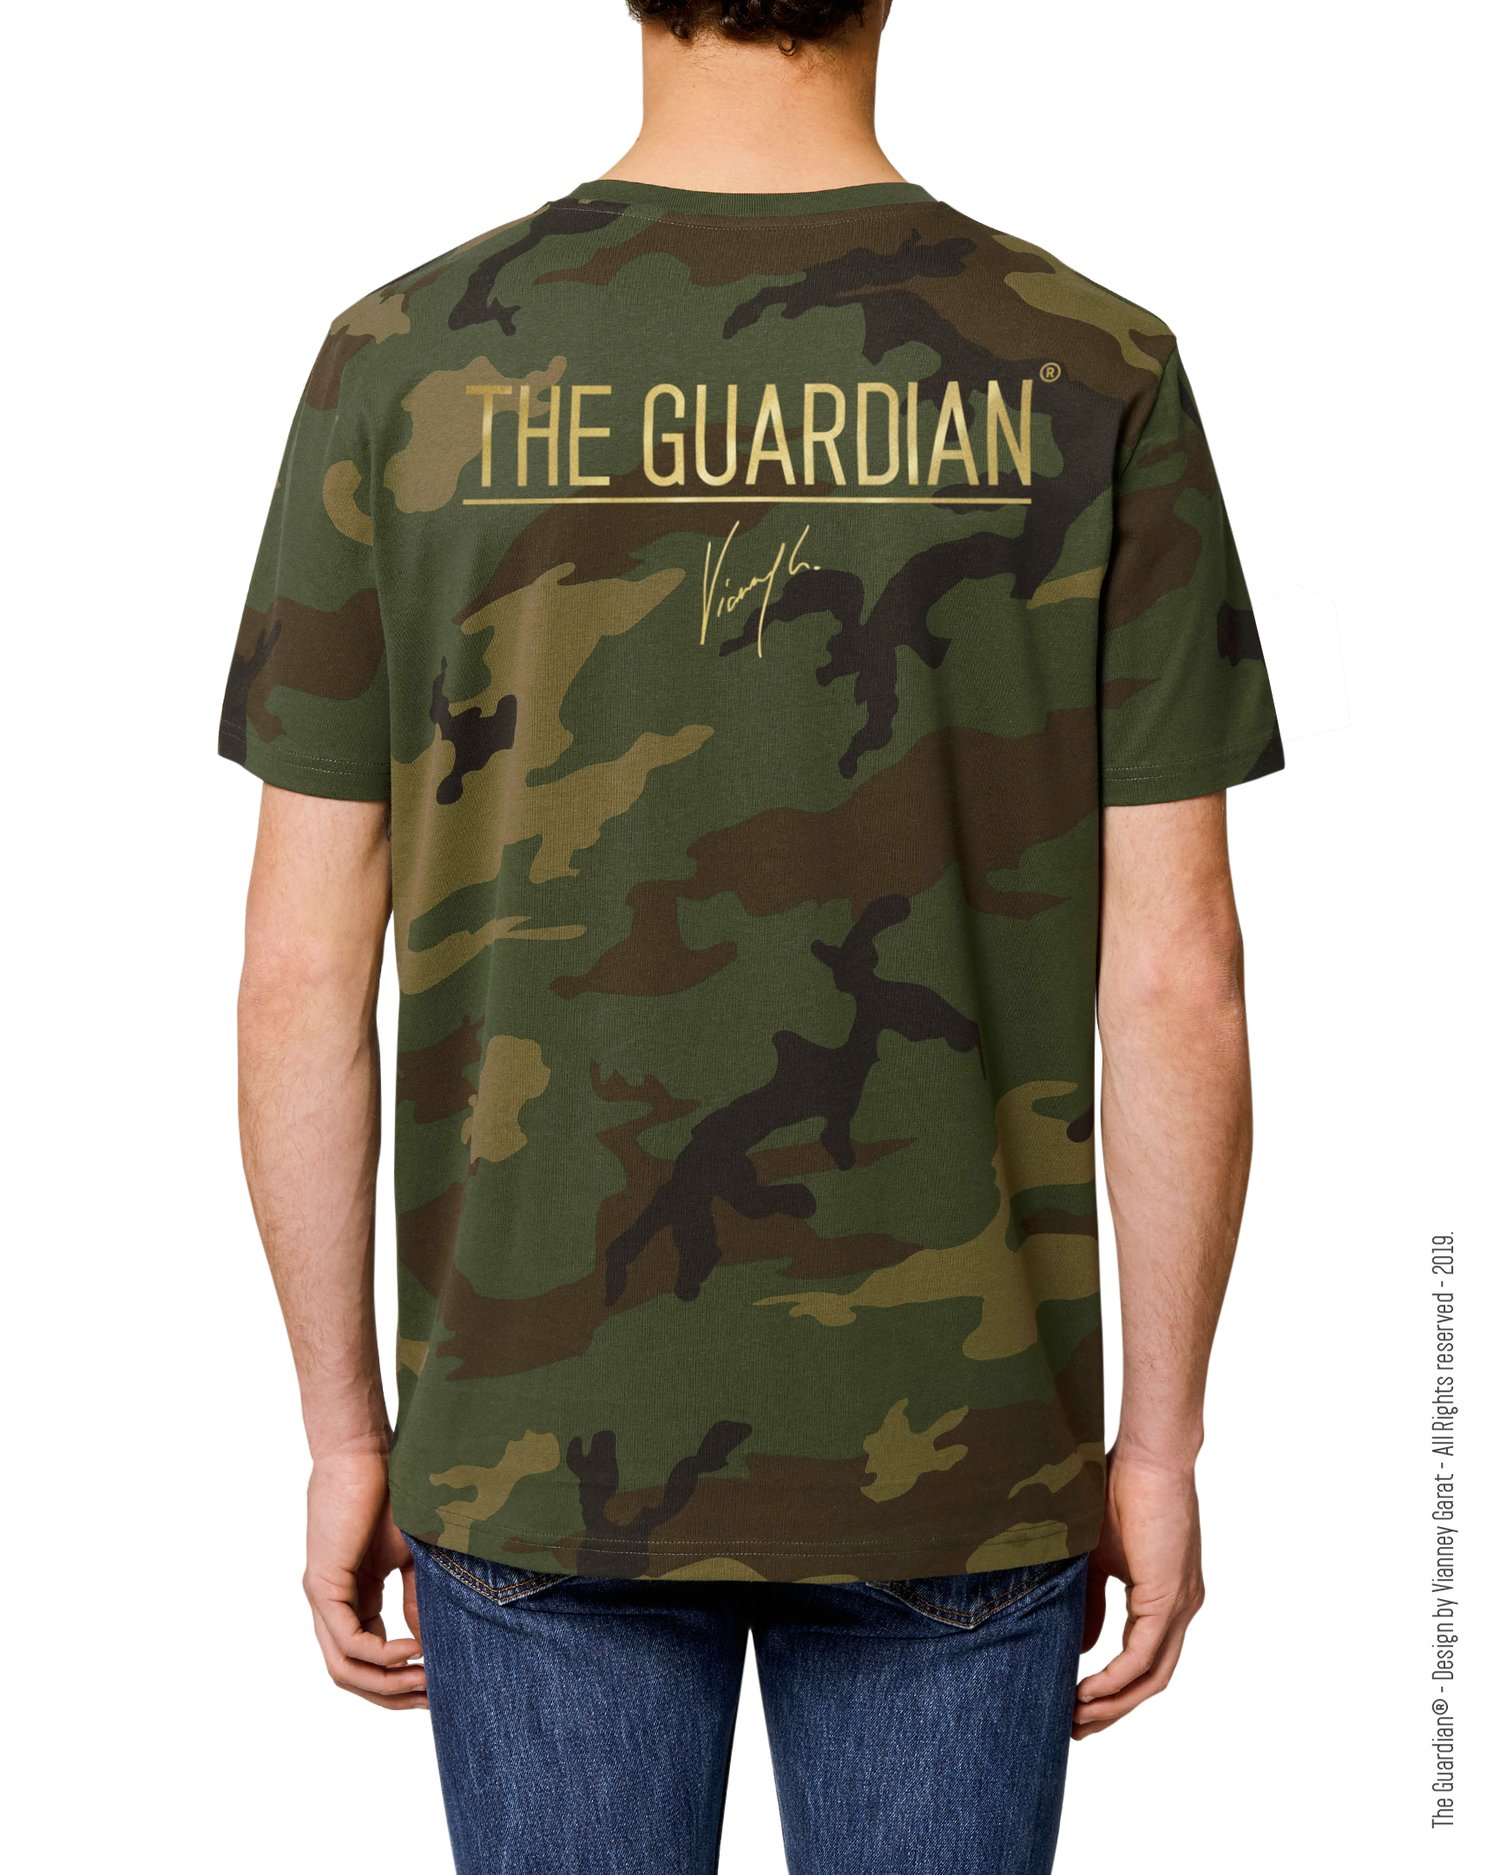 Image of T-Shirt The Guardian® Dream Fighter Edition